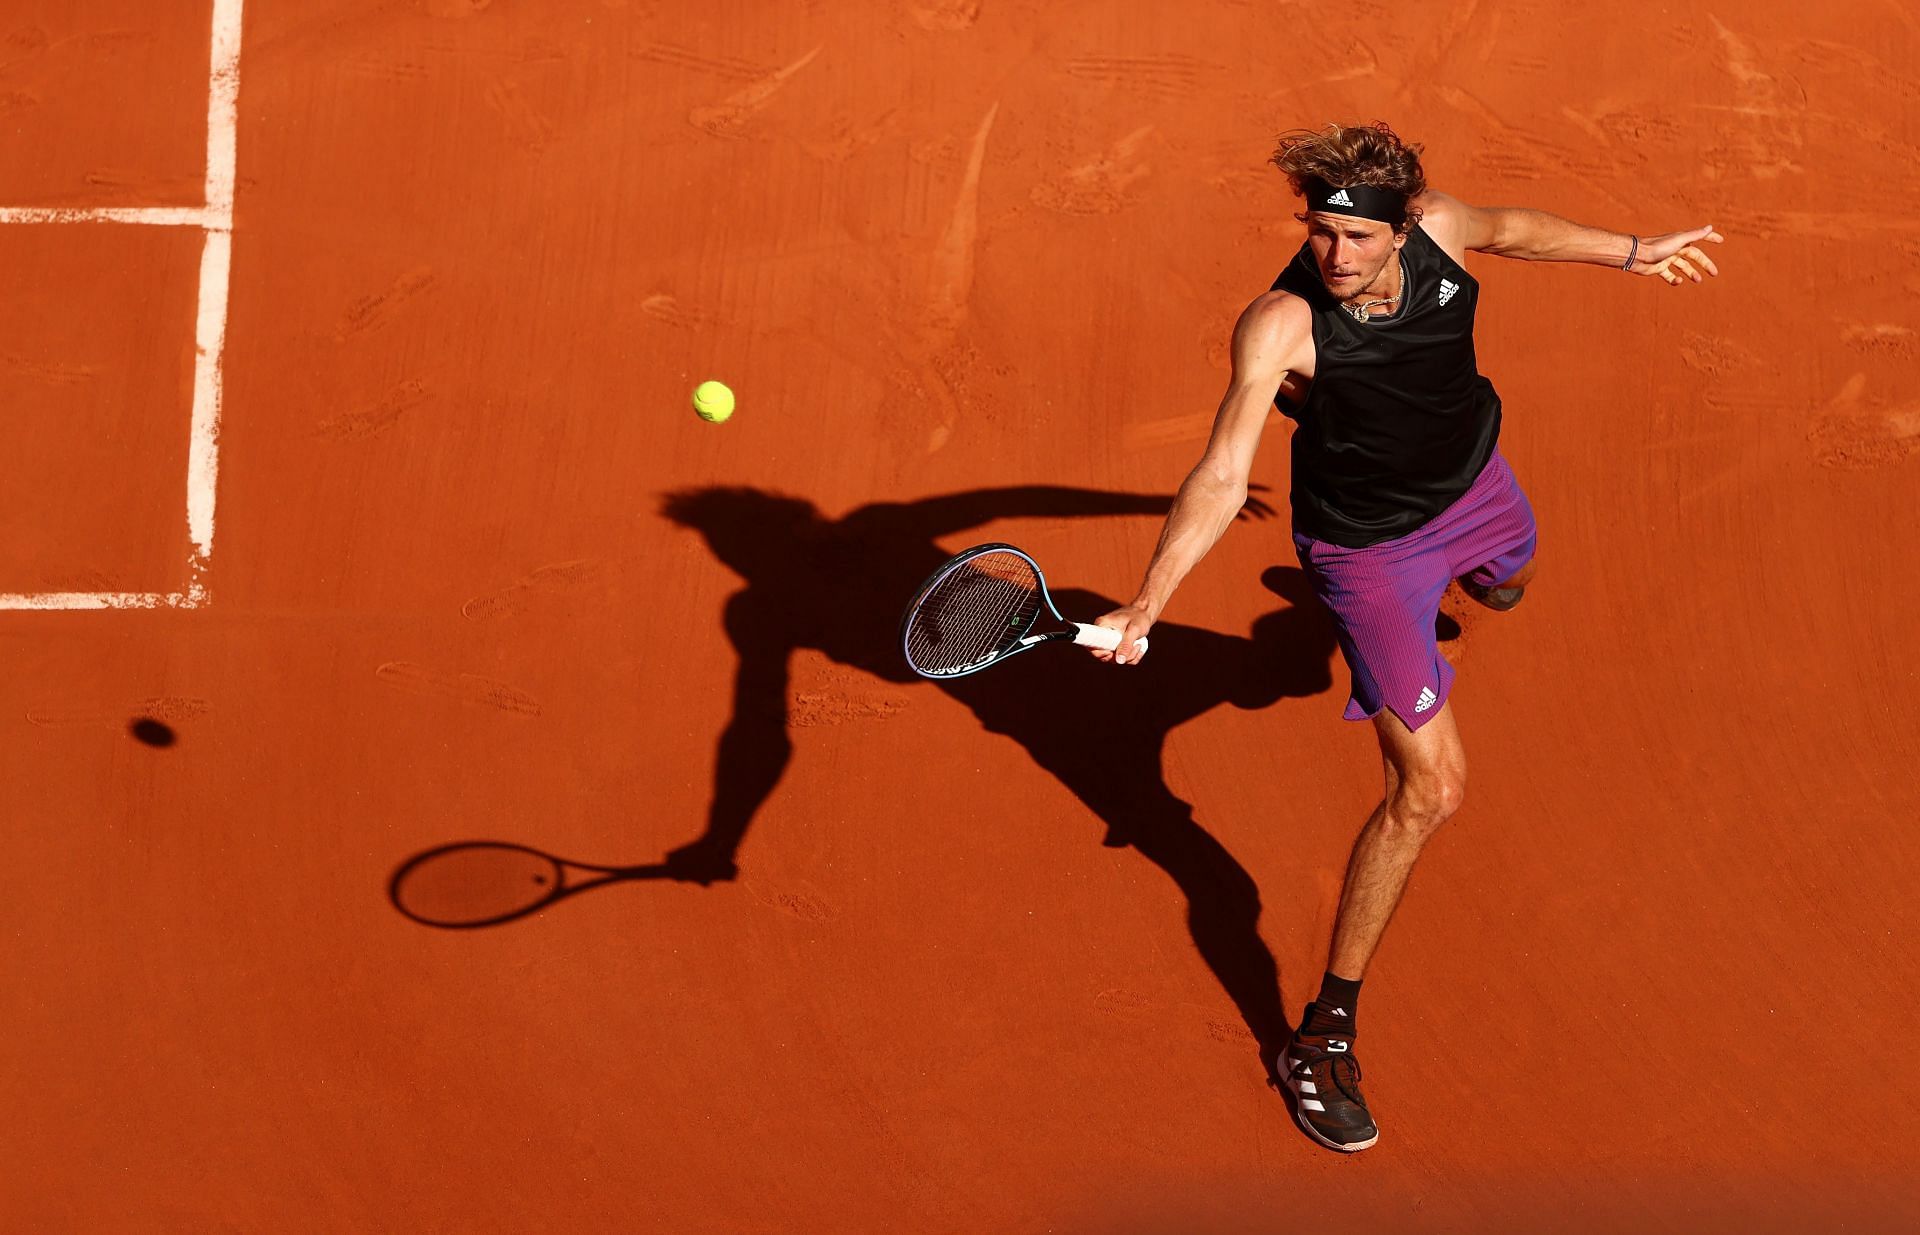 Alexander Zverev at the 2021 French Open